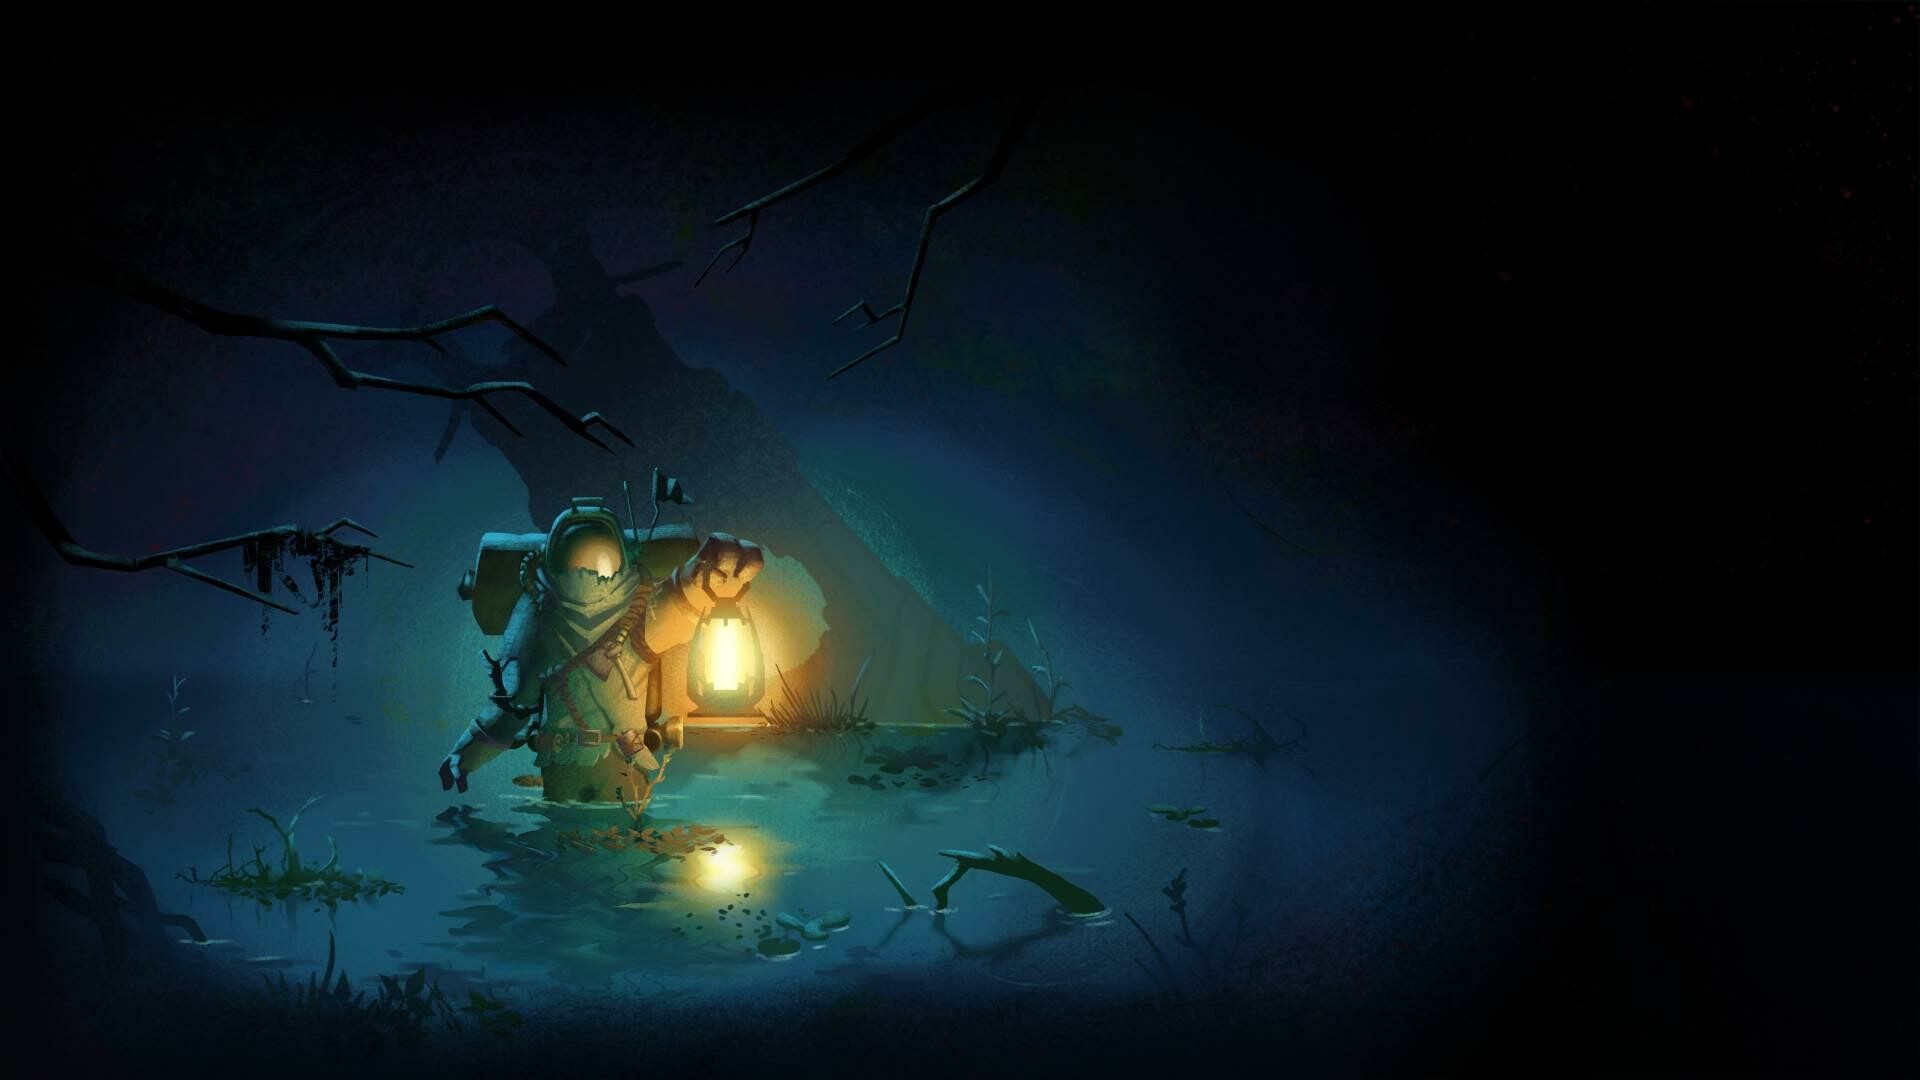 Outer Wilds: Every loop resets when the sun goes supernova after 22 minutes, or when the player-character otherwise dies, Action-adventure game. 1920x1080 Full HD Wallpaper.